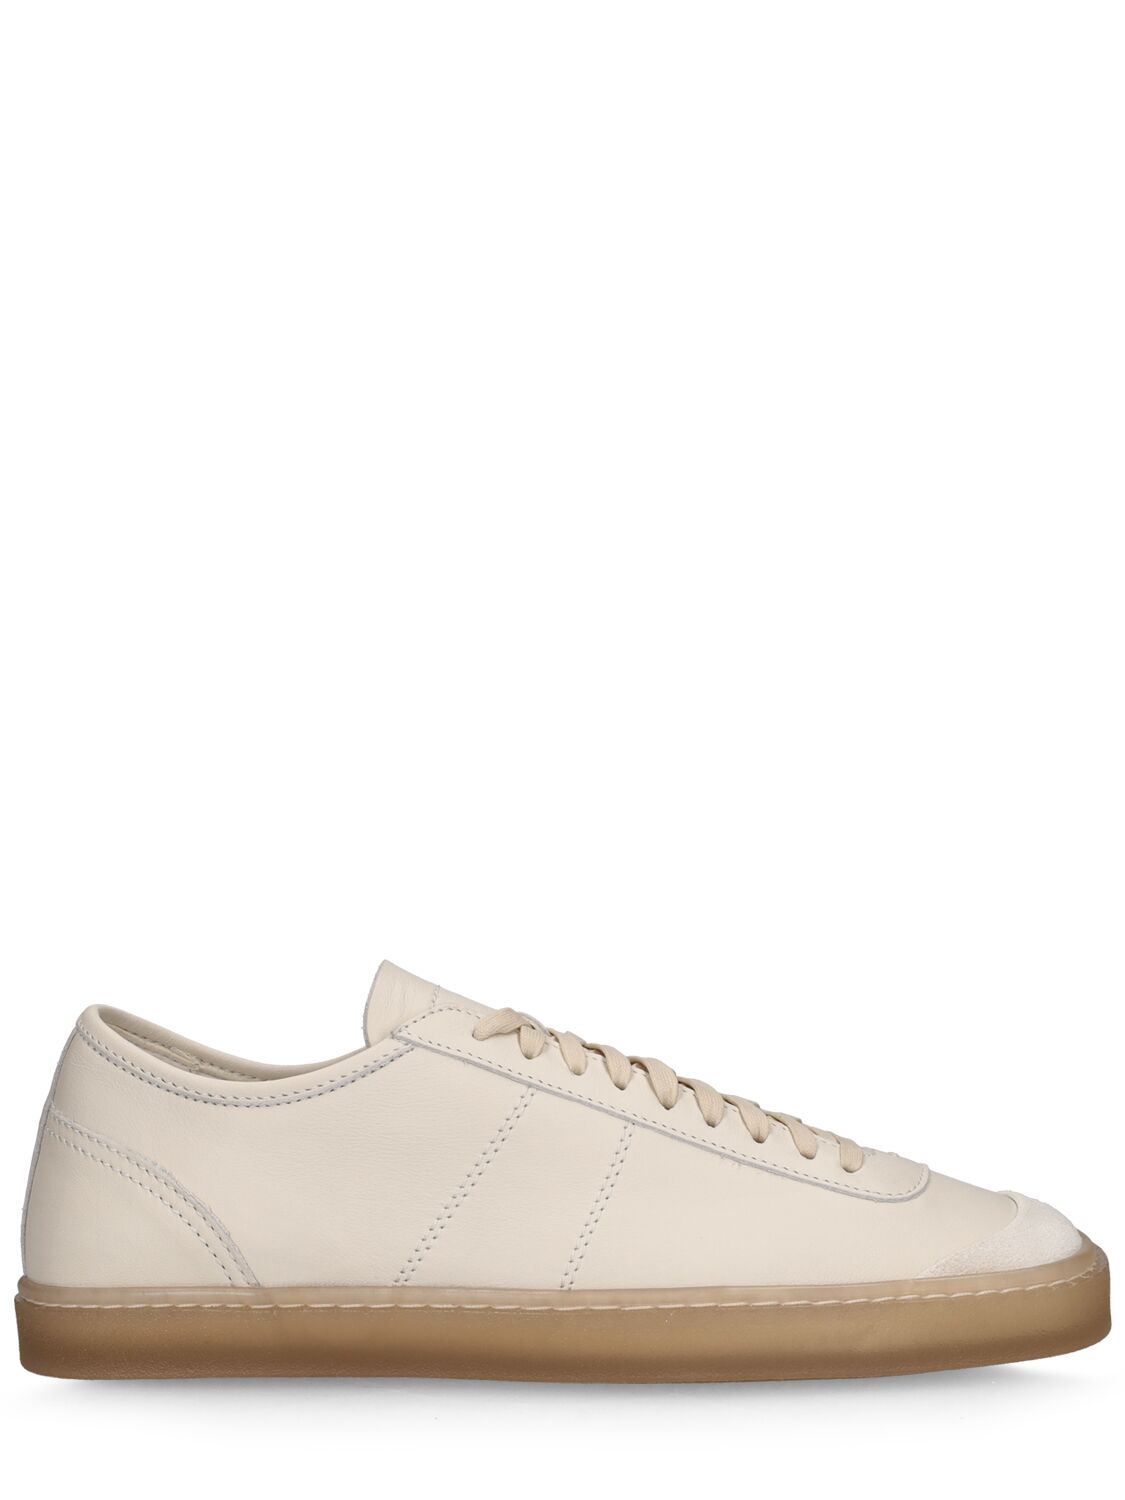 Clay White Linoleum Laced Up Trainers in Soft Leather